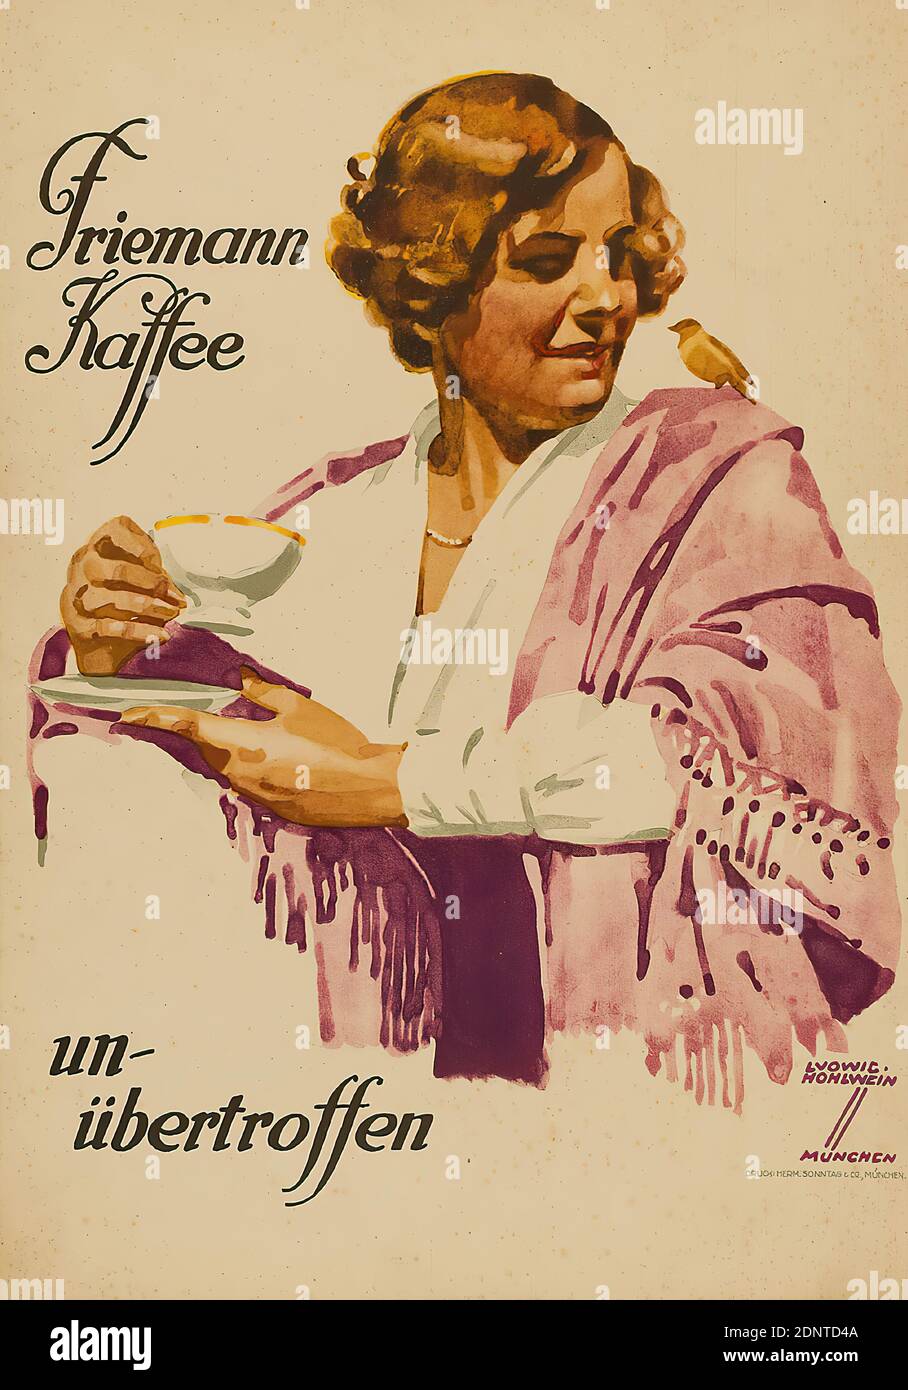 Ludwig Hohlwein, Hermann Sonntag & Co, Friemann Kaffee - unbeatable, paper, lithography, total: height: 56,5 cm; width: 39,5 cm, signed: recto u. r. im Druck: LUDWIG HOHLWEIN, MÜNCHEN, product advertising (posters), coffee, drinking, woman, joy, pleasure, enjoyment, birds, cup and saucer Stock Photo